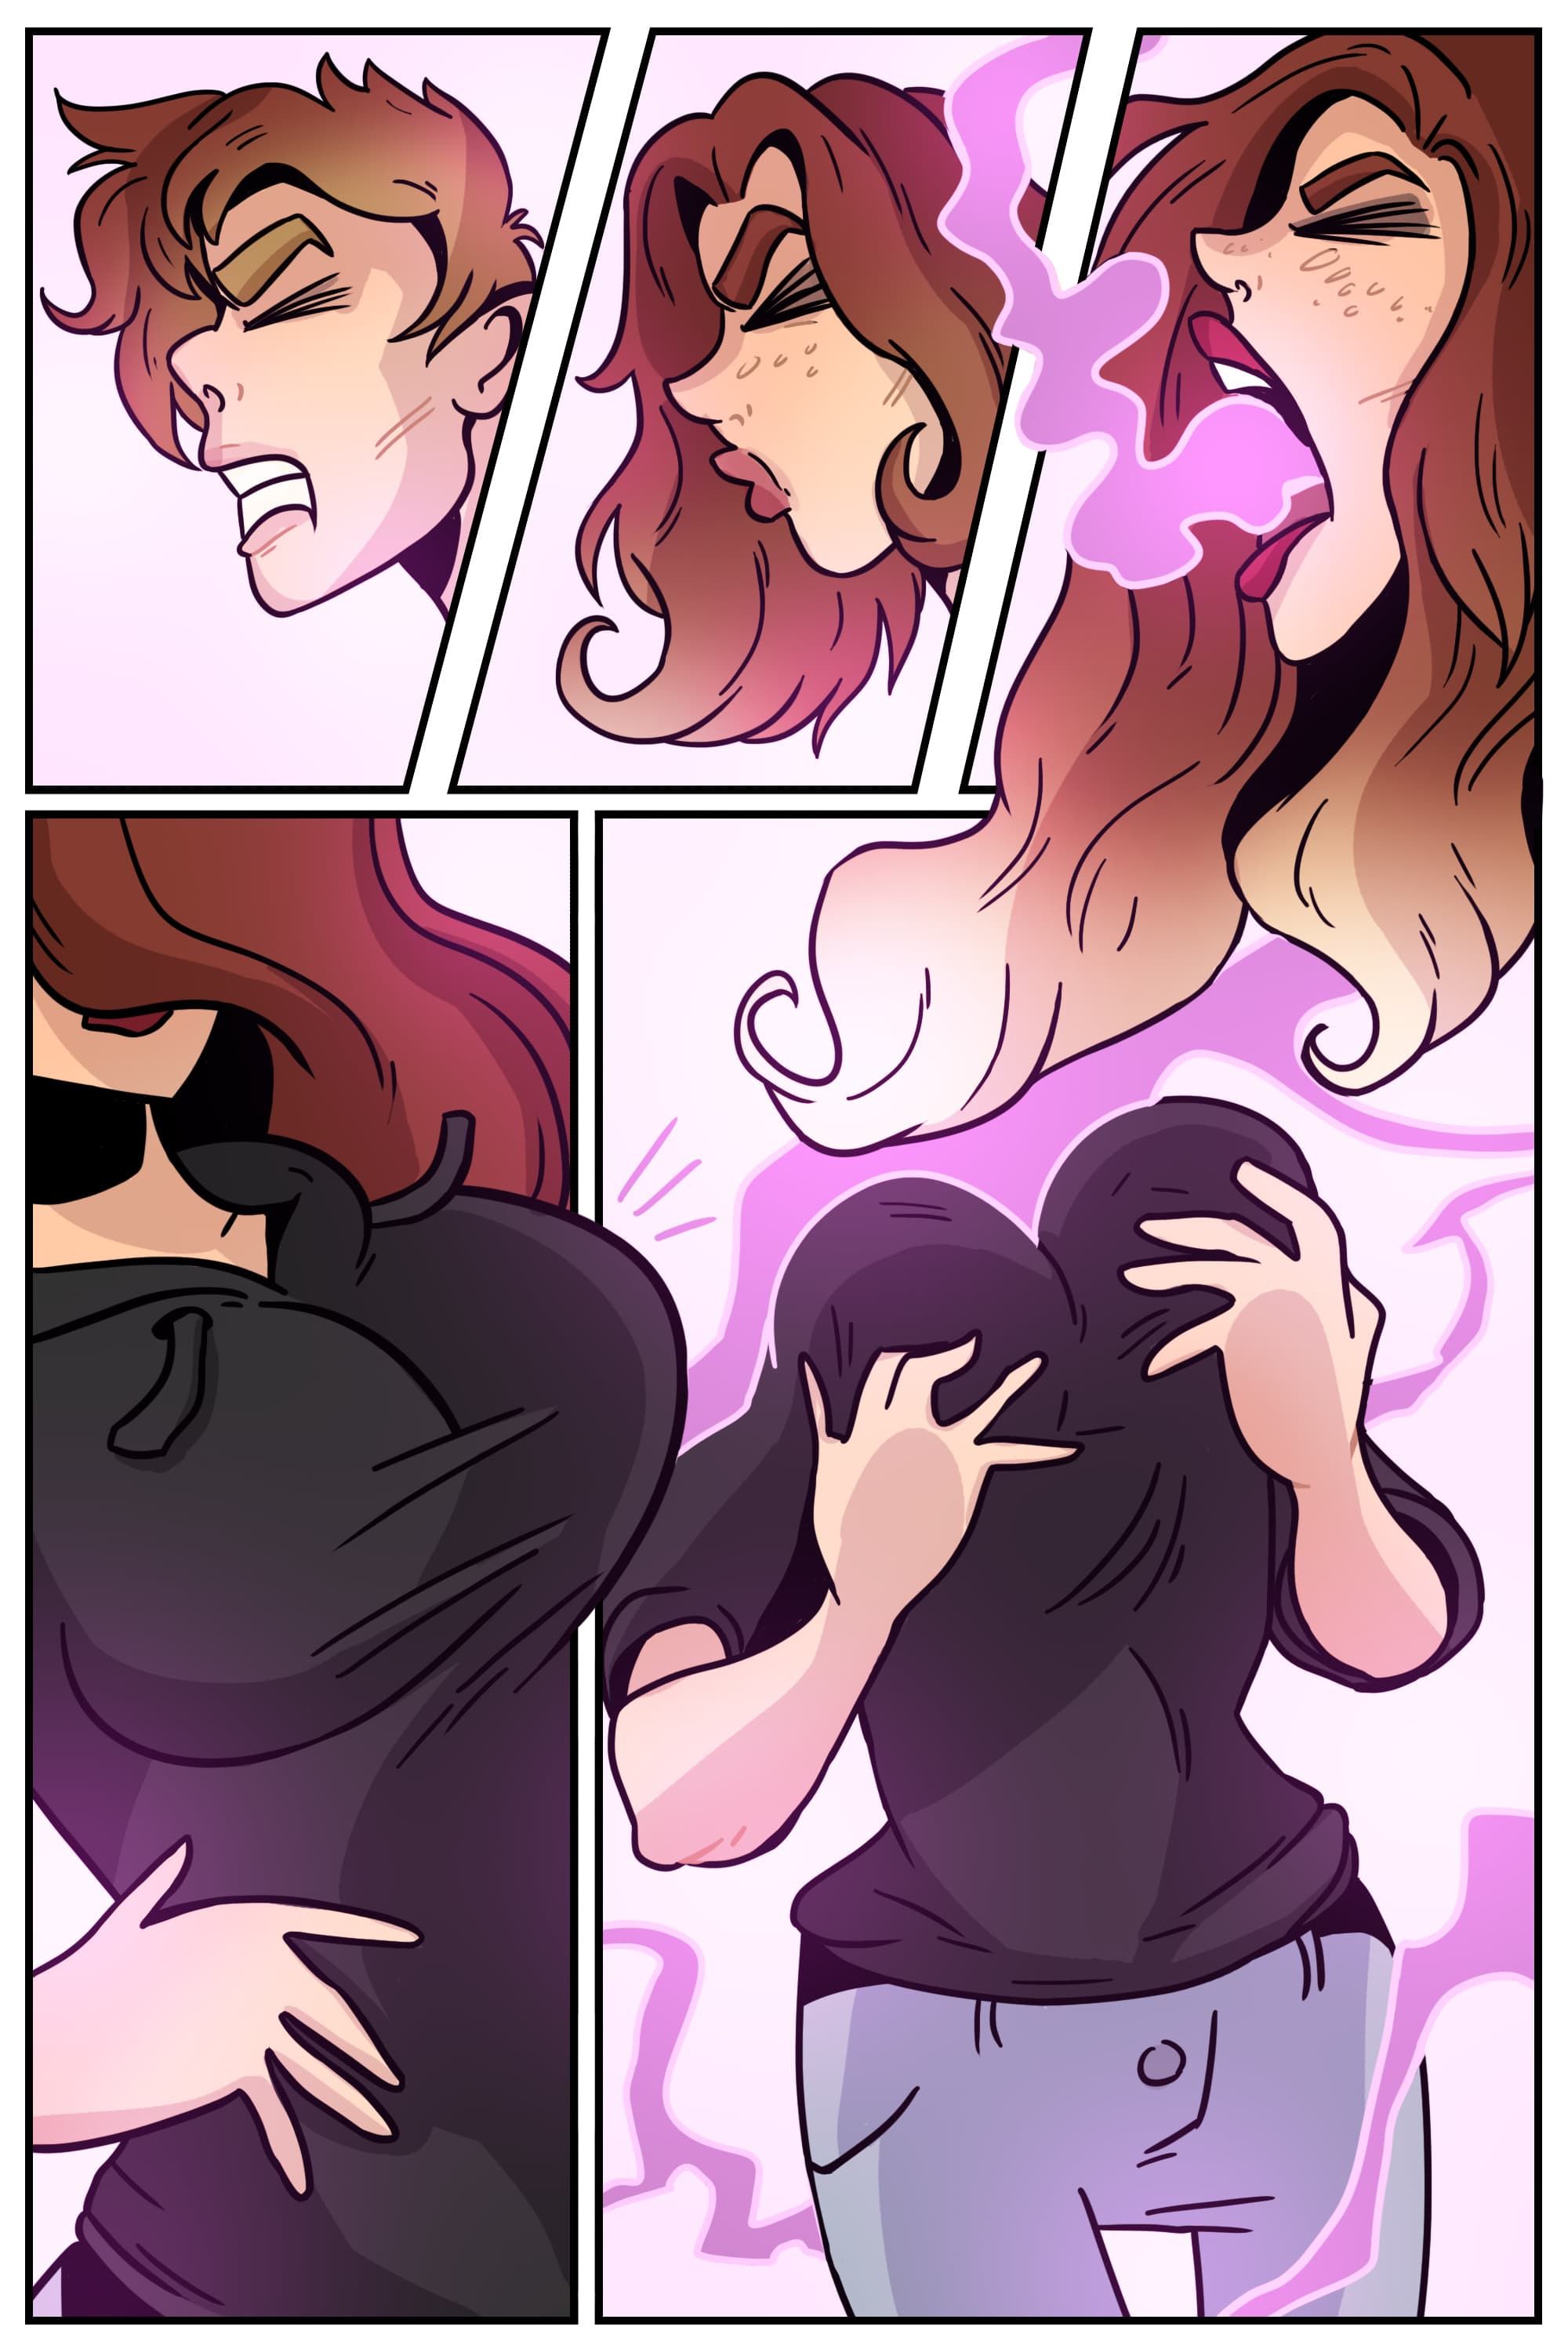 The New Girl Issue 1-5 by Grumpy TG page 48